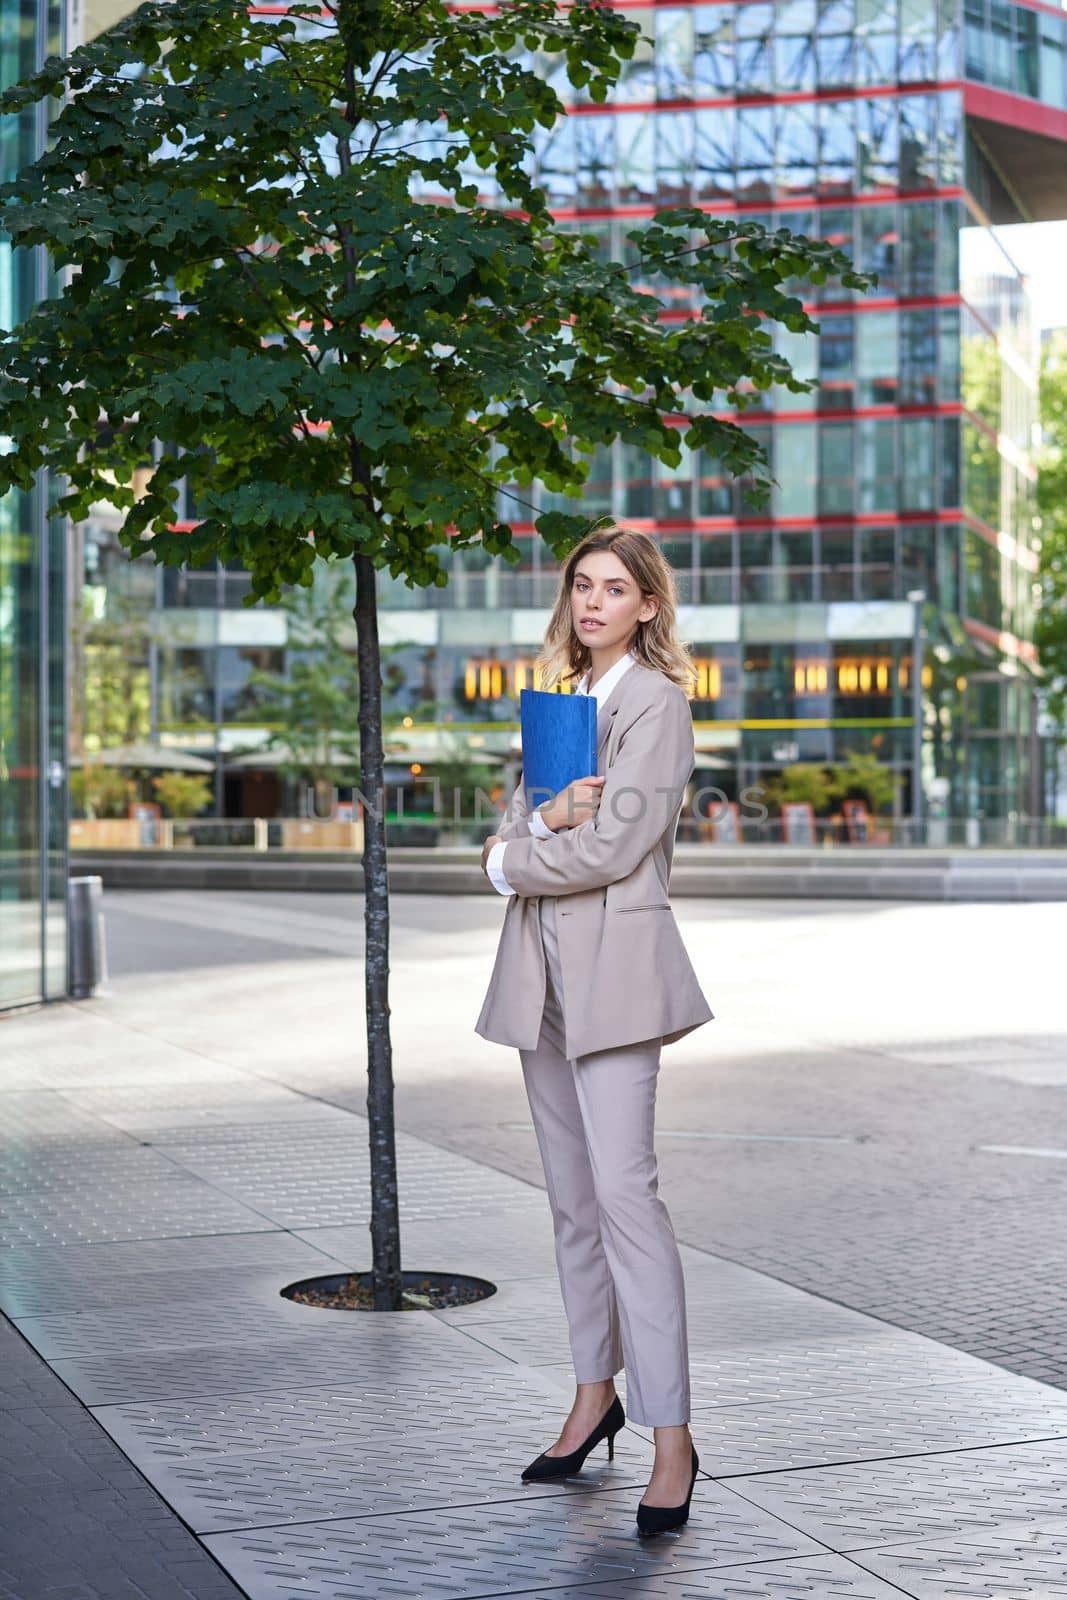 Portrait of young saleswoman in beige business suit, holding blue folder with work documents, standing outdoors on street of city center.